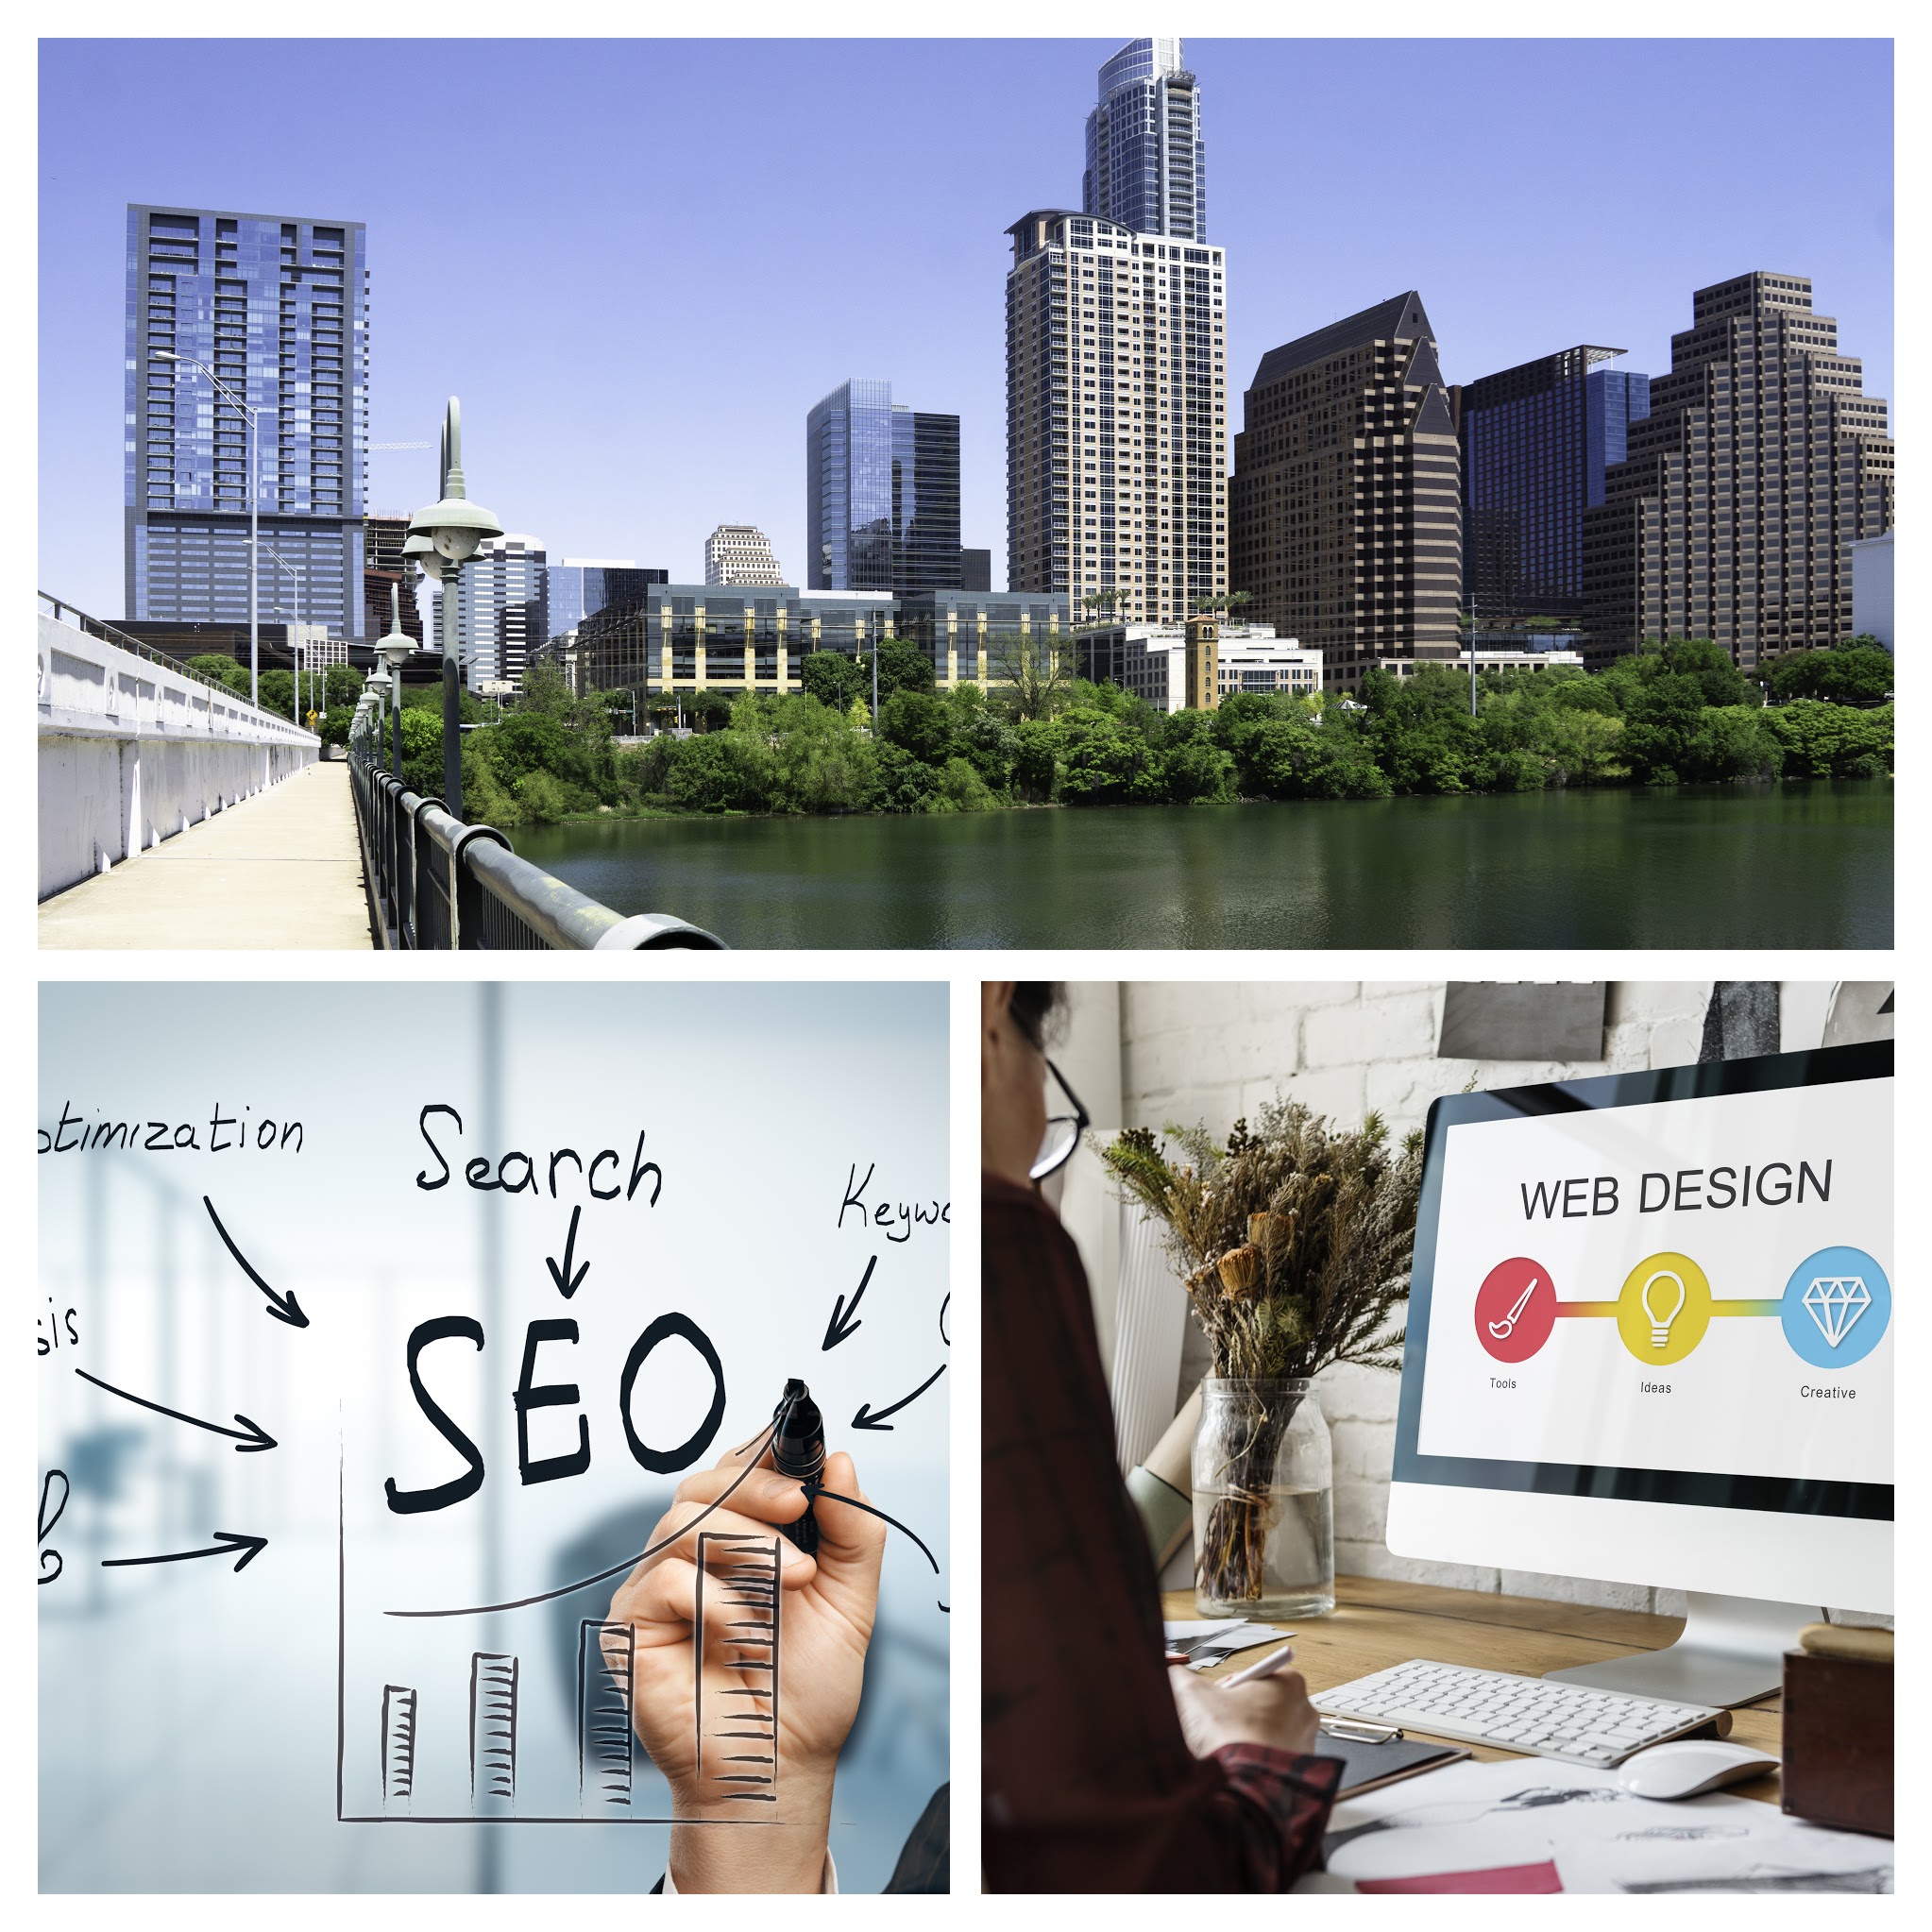 What is the best website design company in Austin, Texas?